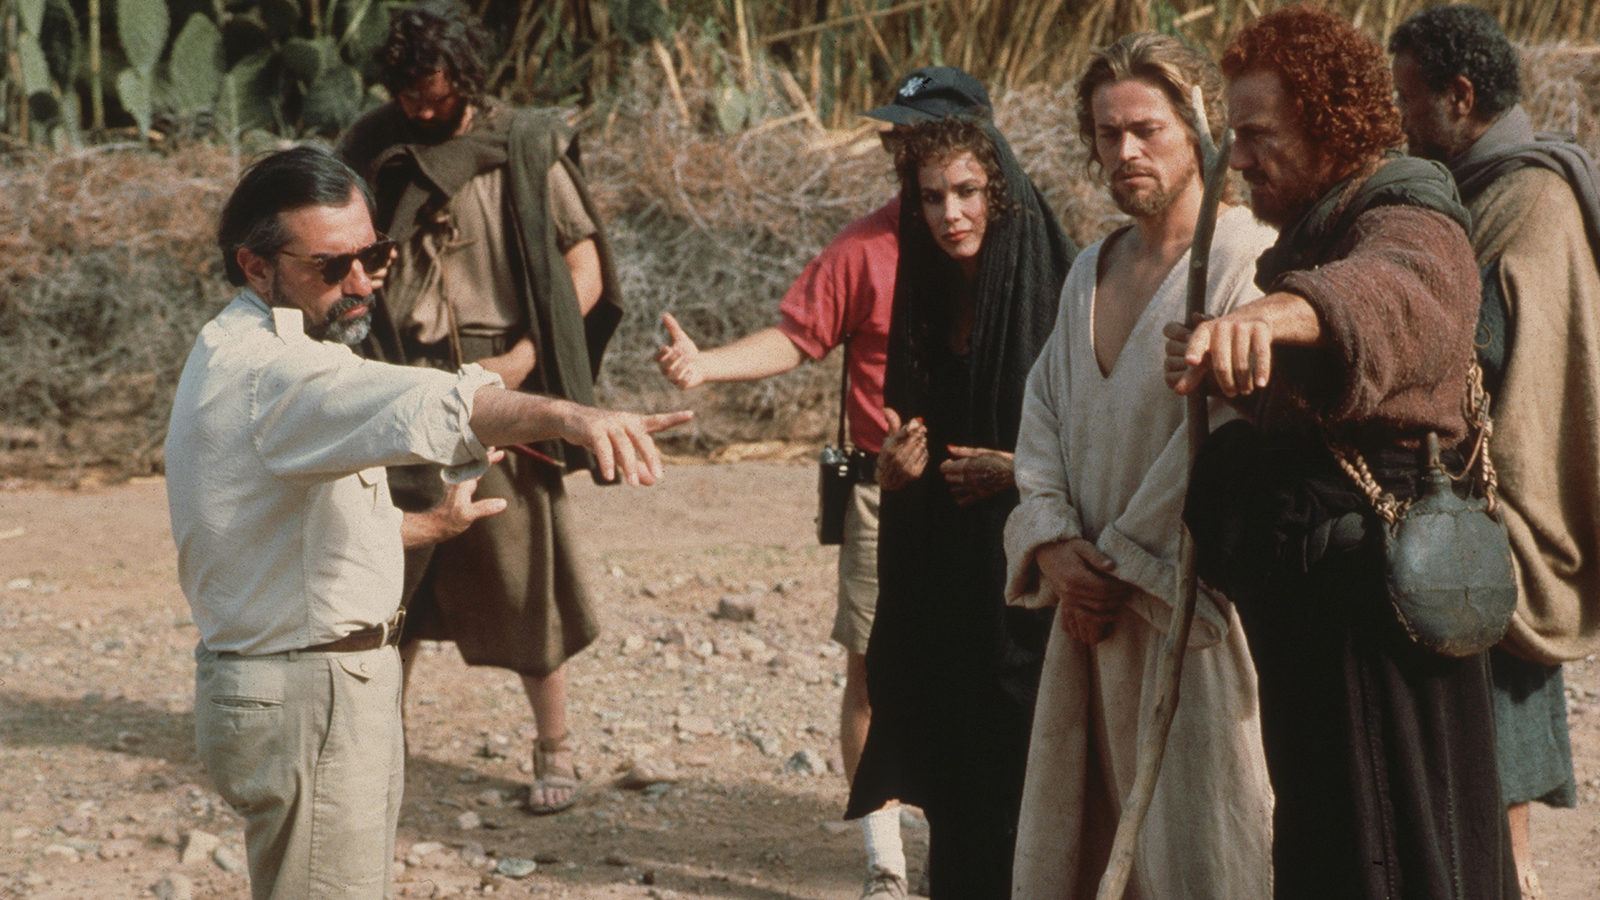 From the set of The Last Temptation of Christ